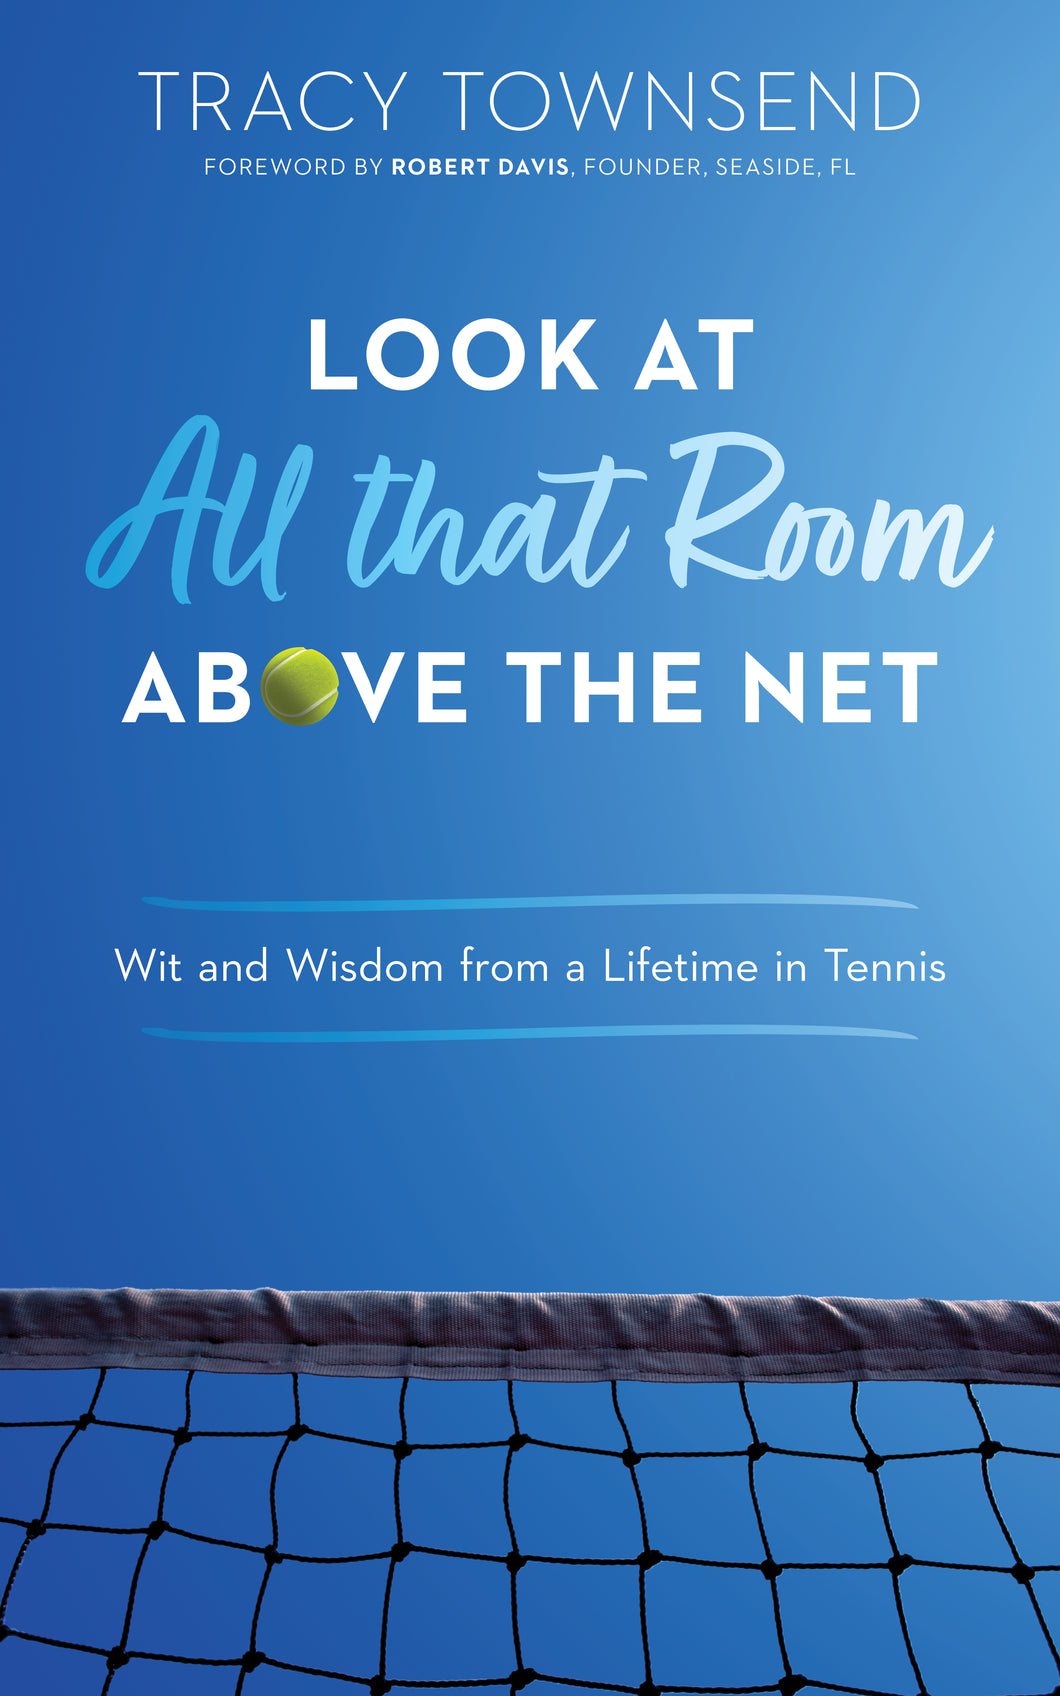 Look at All that Room Above the Net: Wit and Wisdom from a Lifetime in Tennis